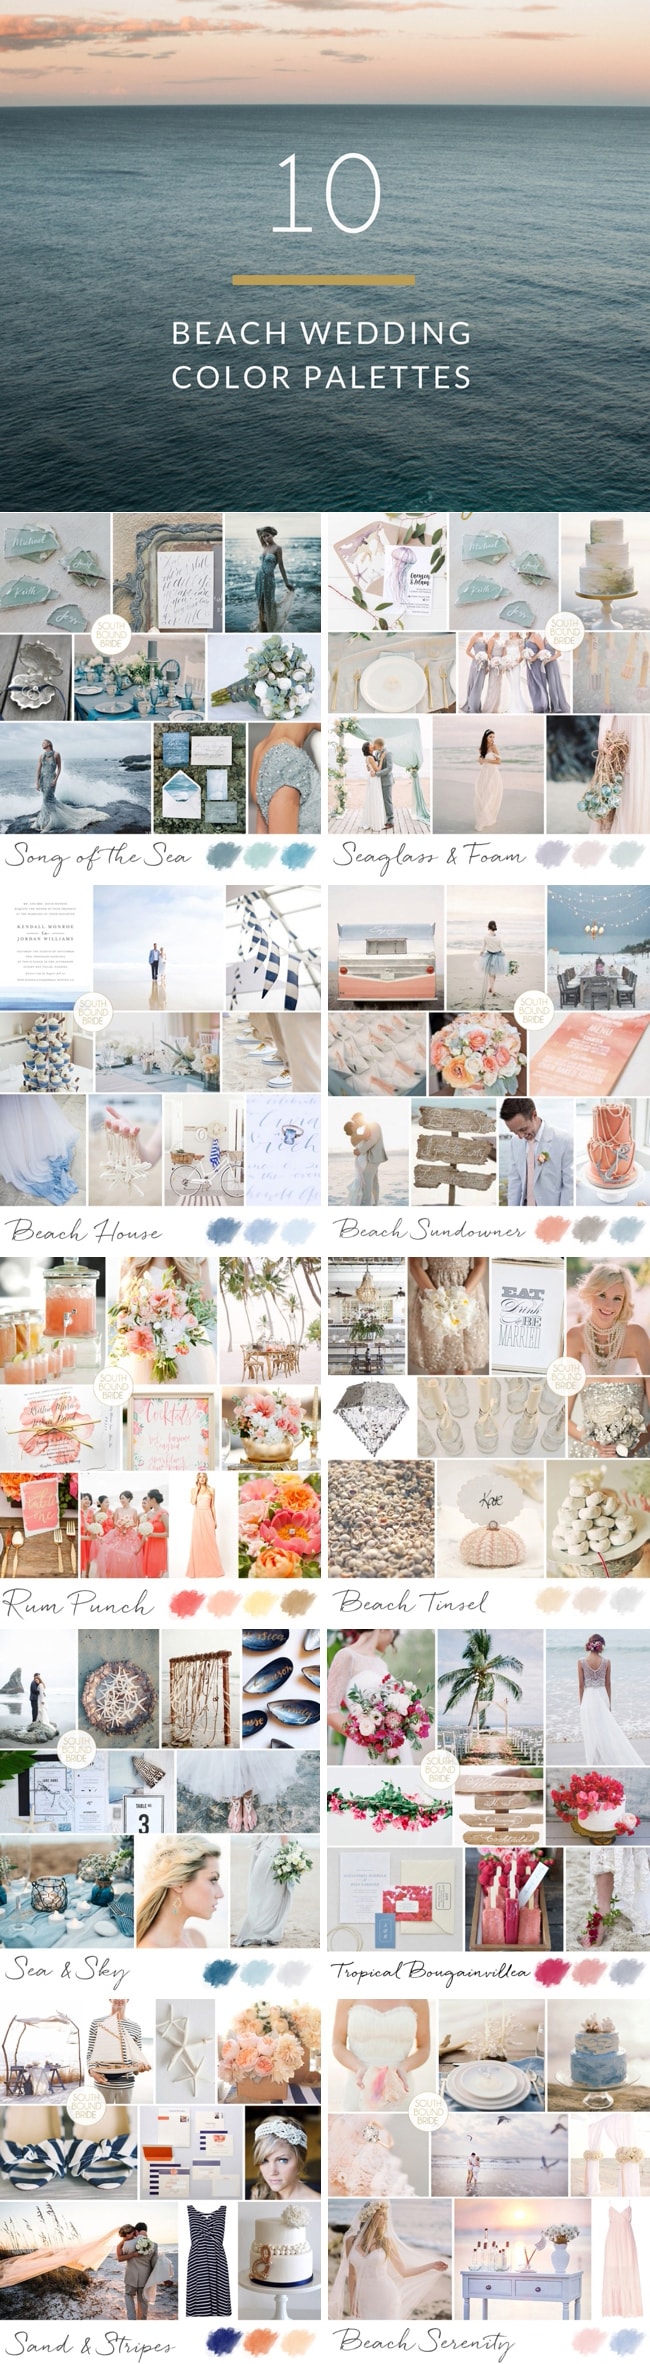 10 Color Palettes for Beach Weddings | SouthBound Bride